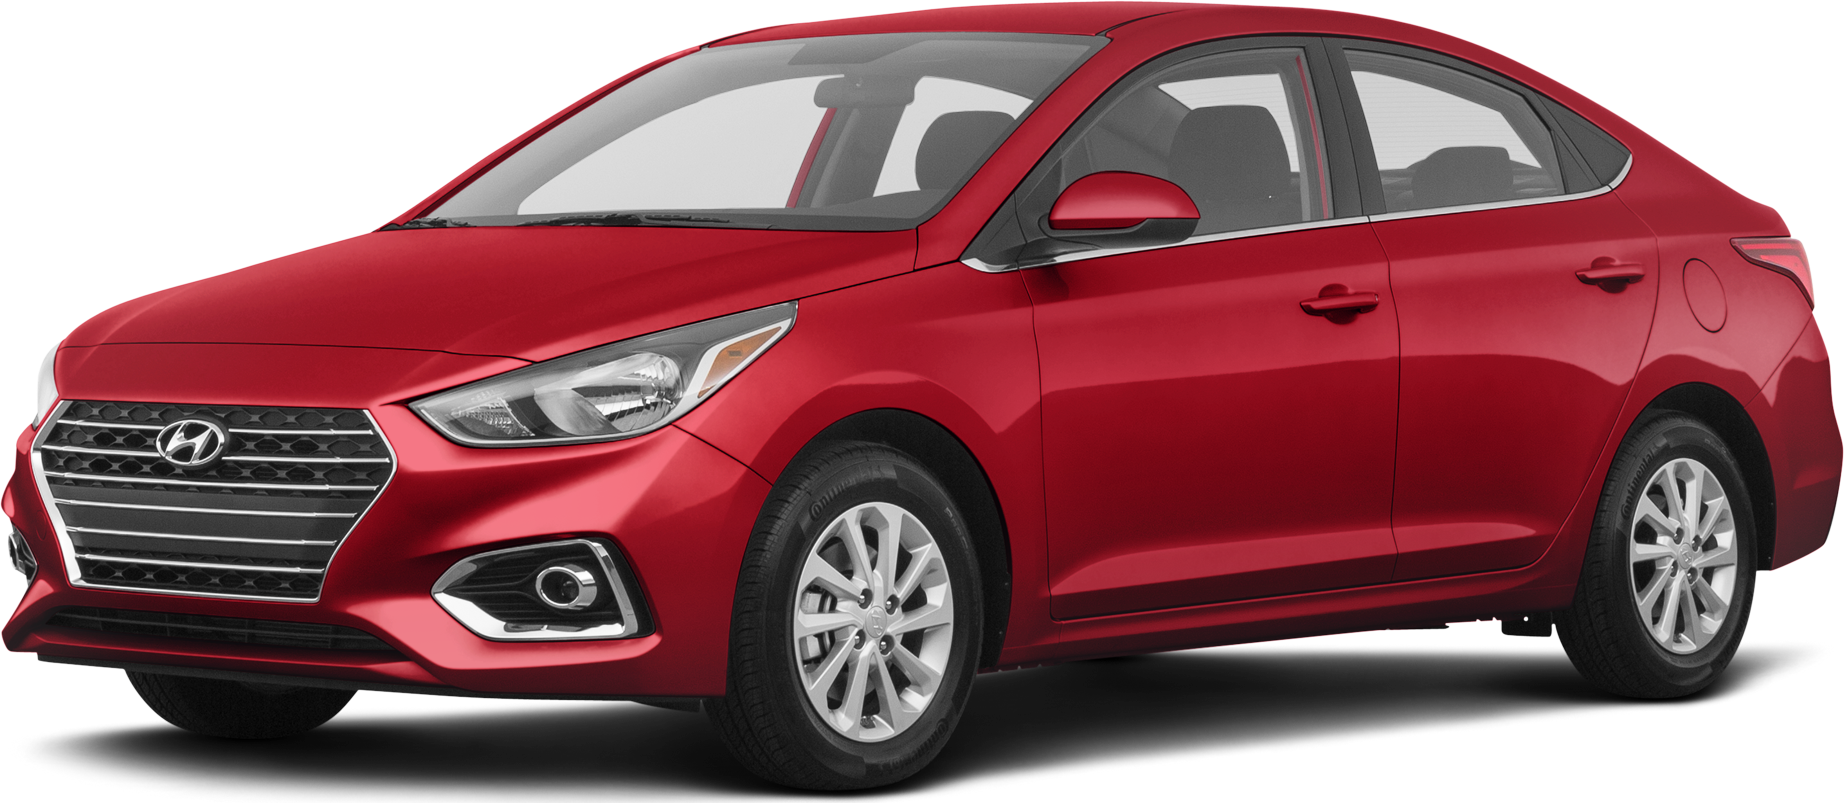 2022 Hyundai Accent Price, Reviews, Pictures & More